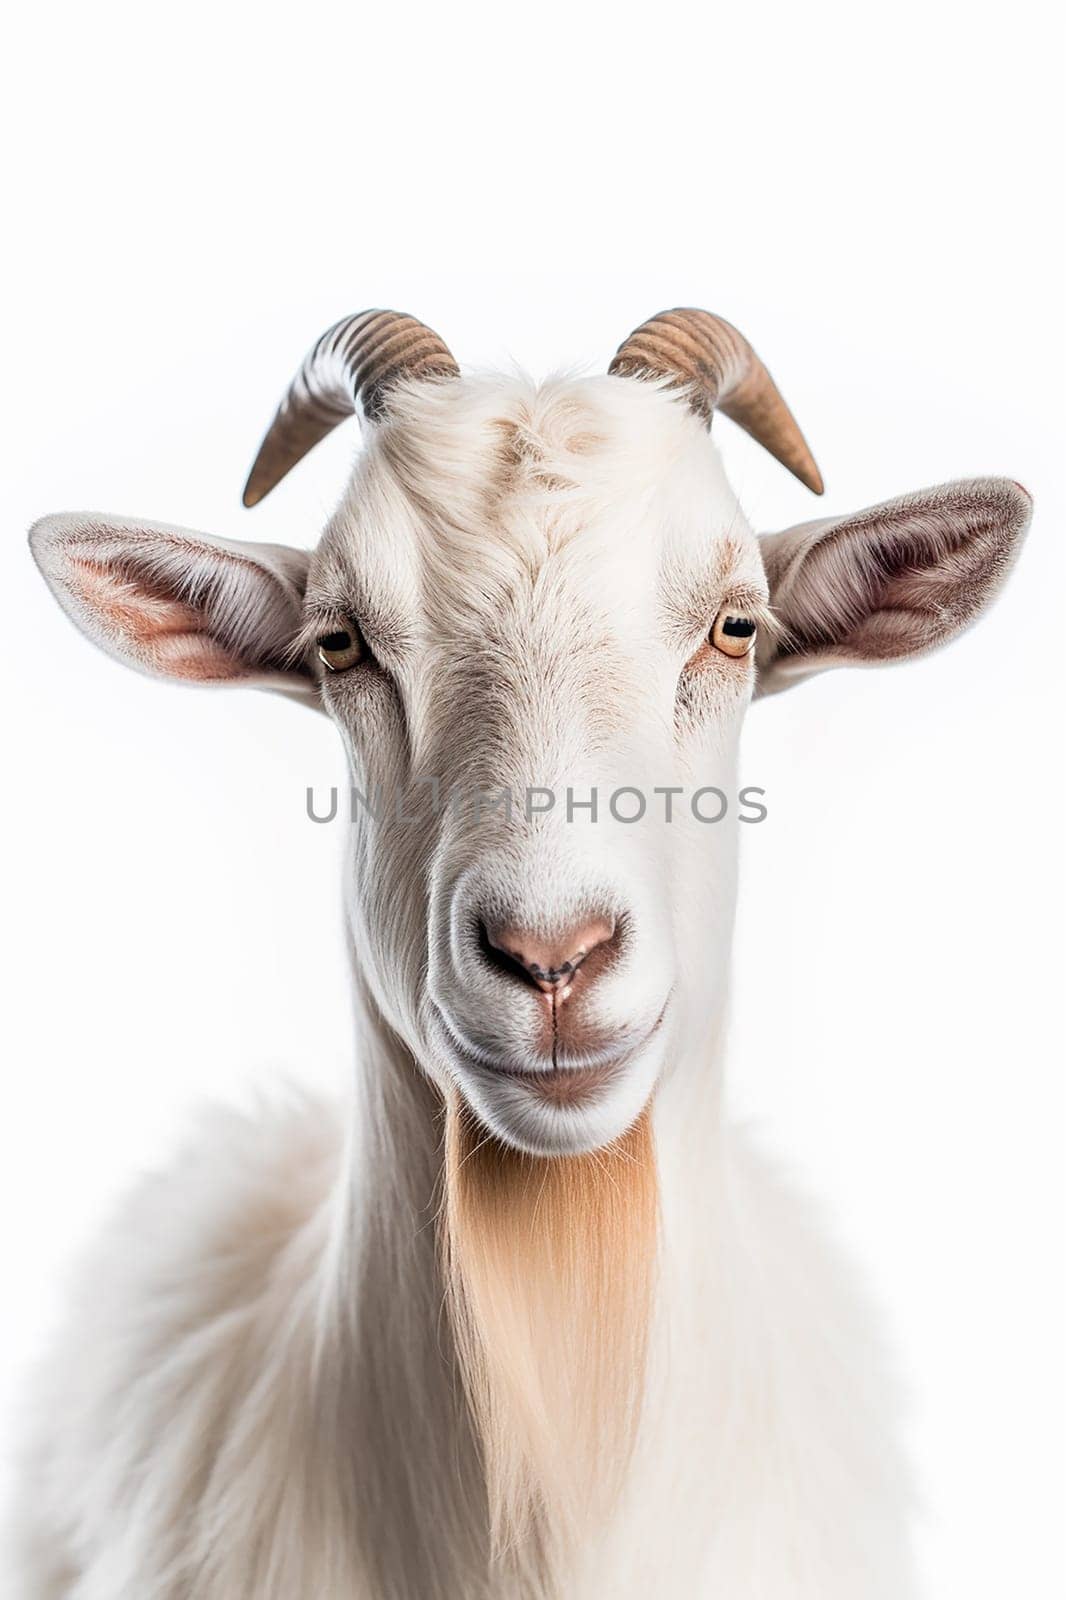 A photo of a farm animal, white goat on white background by Hype2art